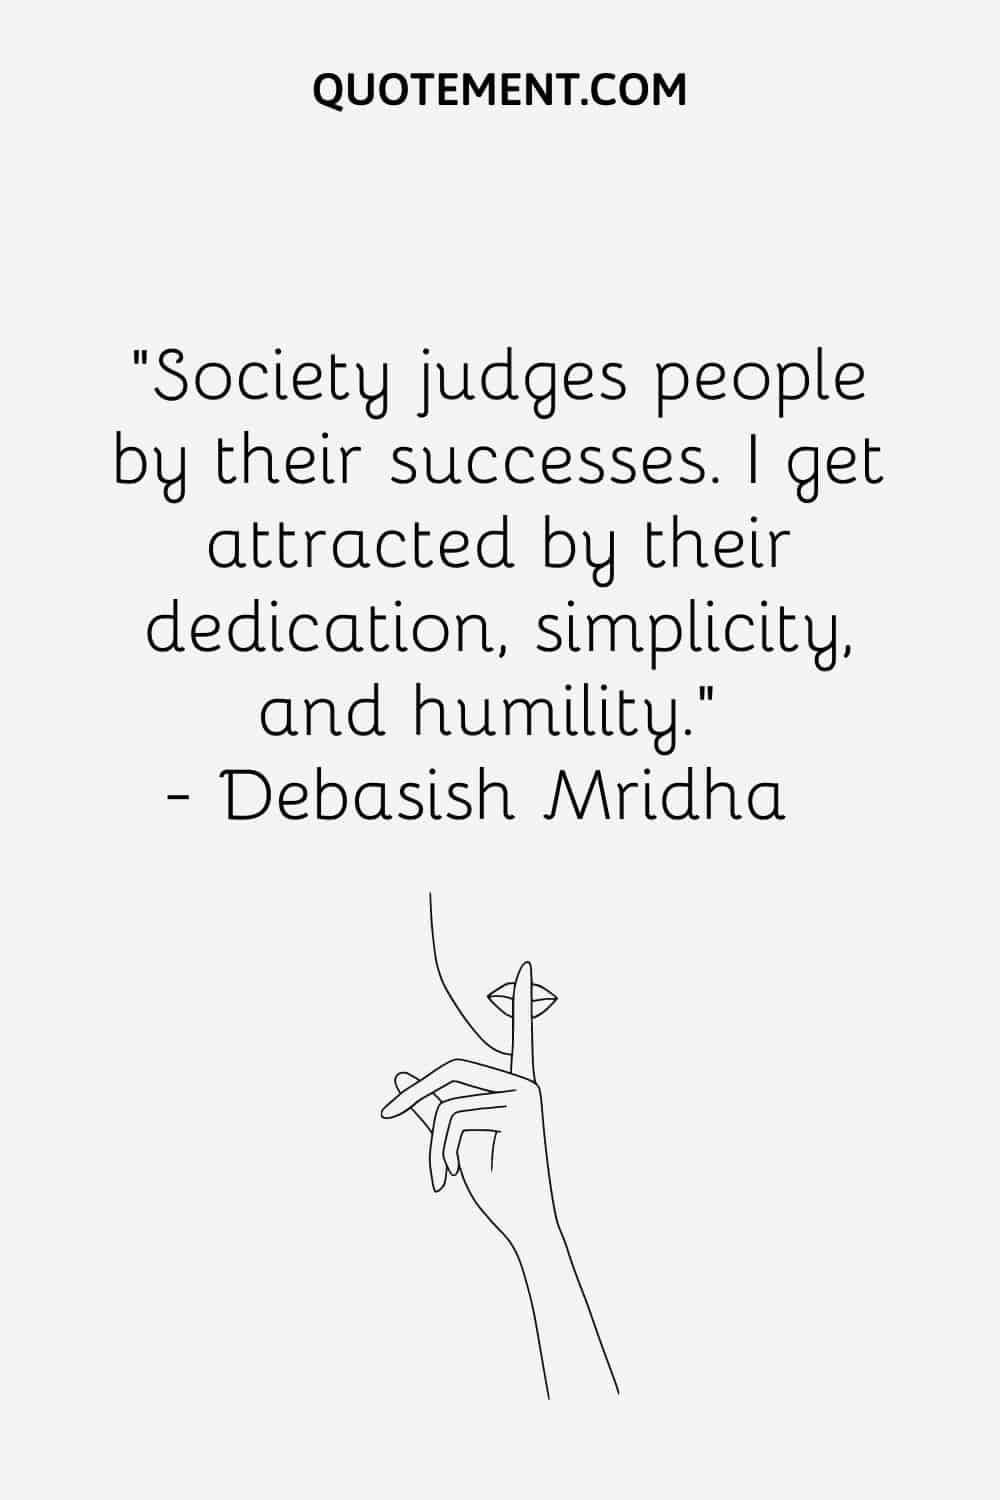 “Society judges people by their successes. I get attracted by their dedication, simplicity, and humility.” ― Debasish Mridha